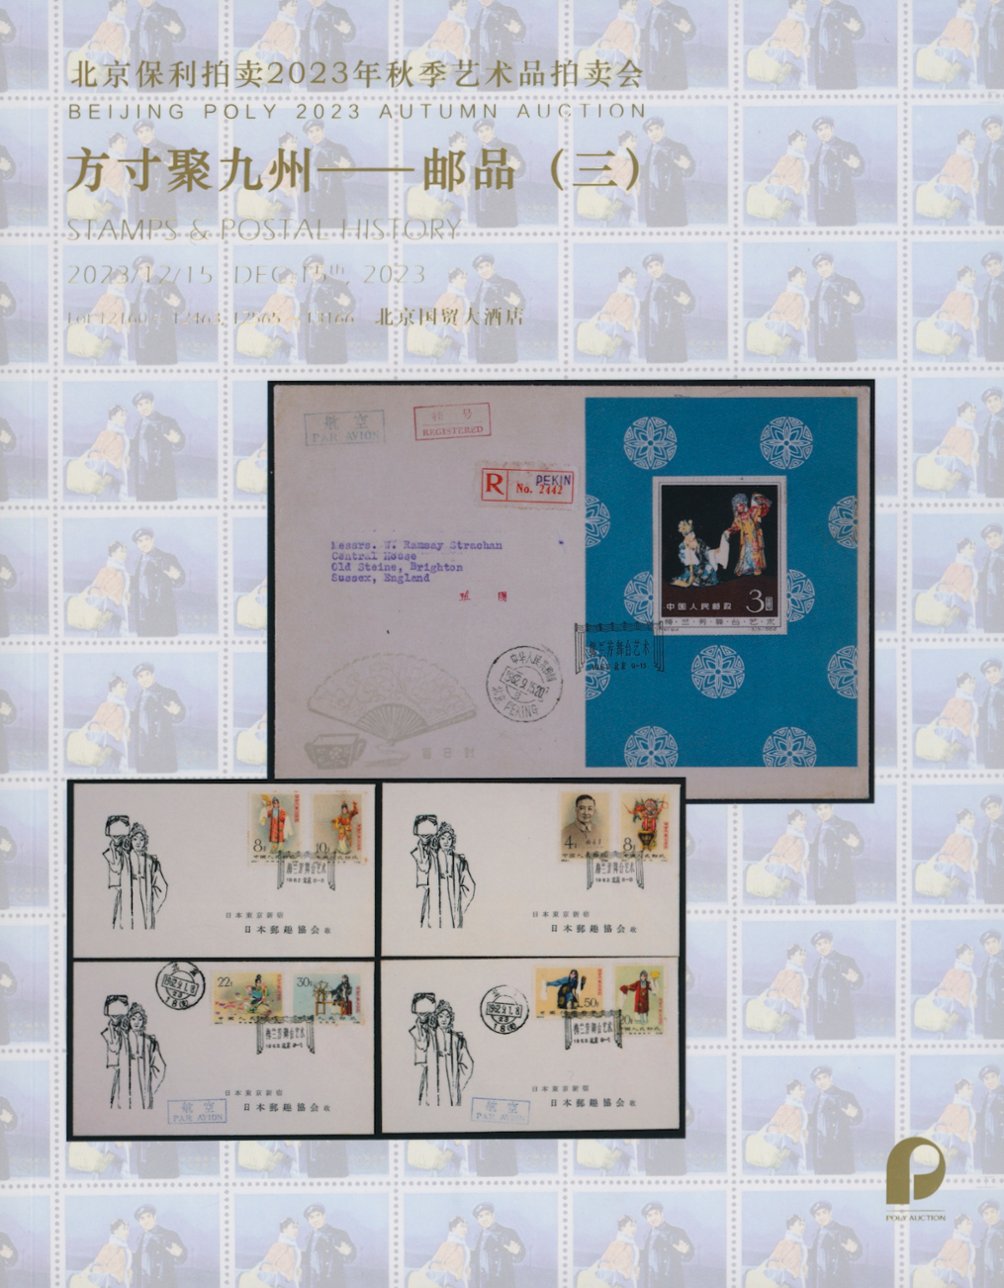 Beijing Poly 2023 Autumn Auction (stamps and postal history of China) in color, soft bound, 649 pages (2 lb 10 oz)